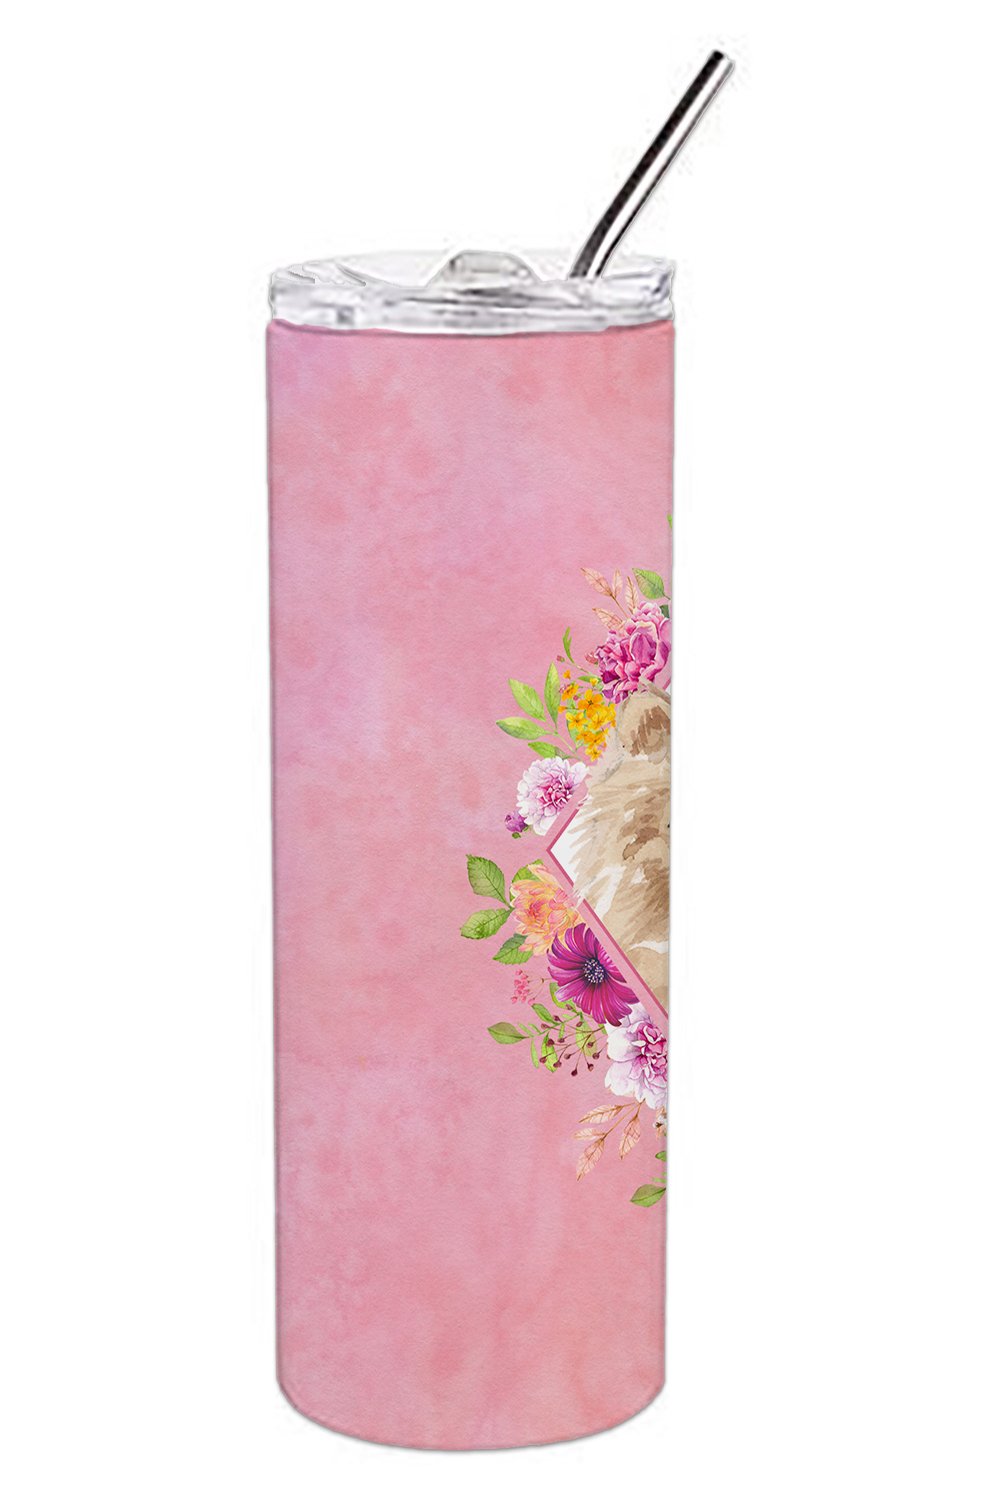 Pomeranian Pink Flowers Double Walled Stainless Steel 20 oz Skinny Tumbler CK4219TBL20 by Caroline's Treasures